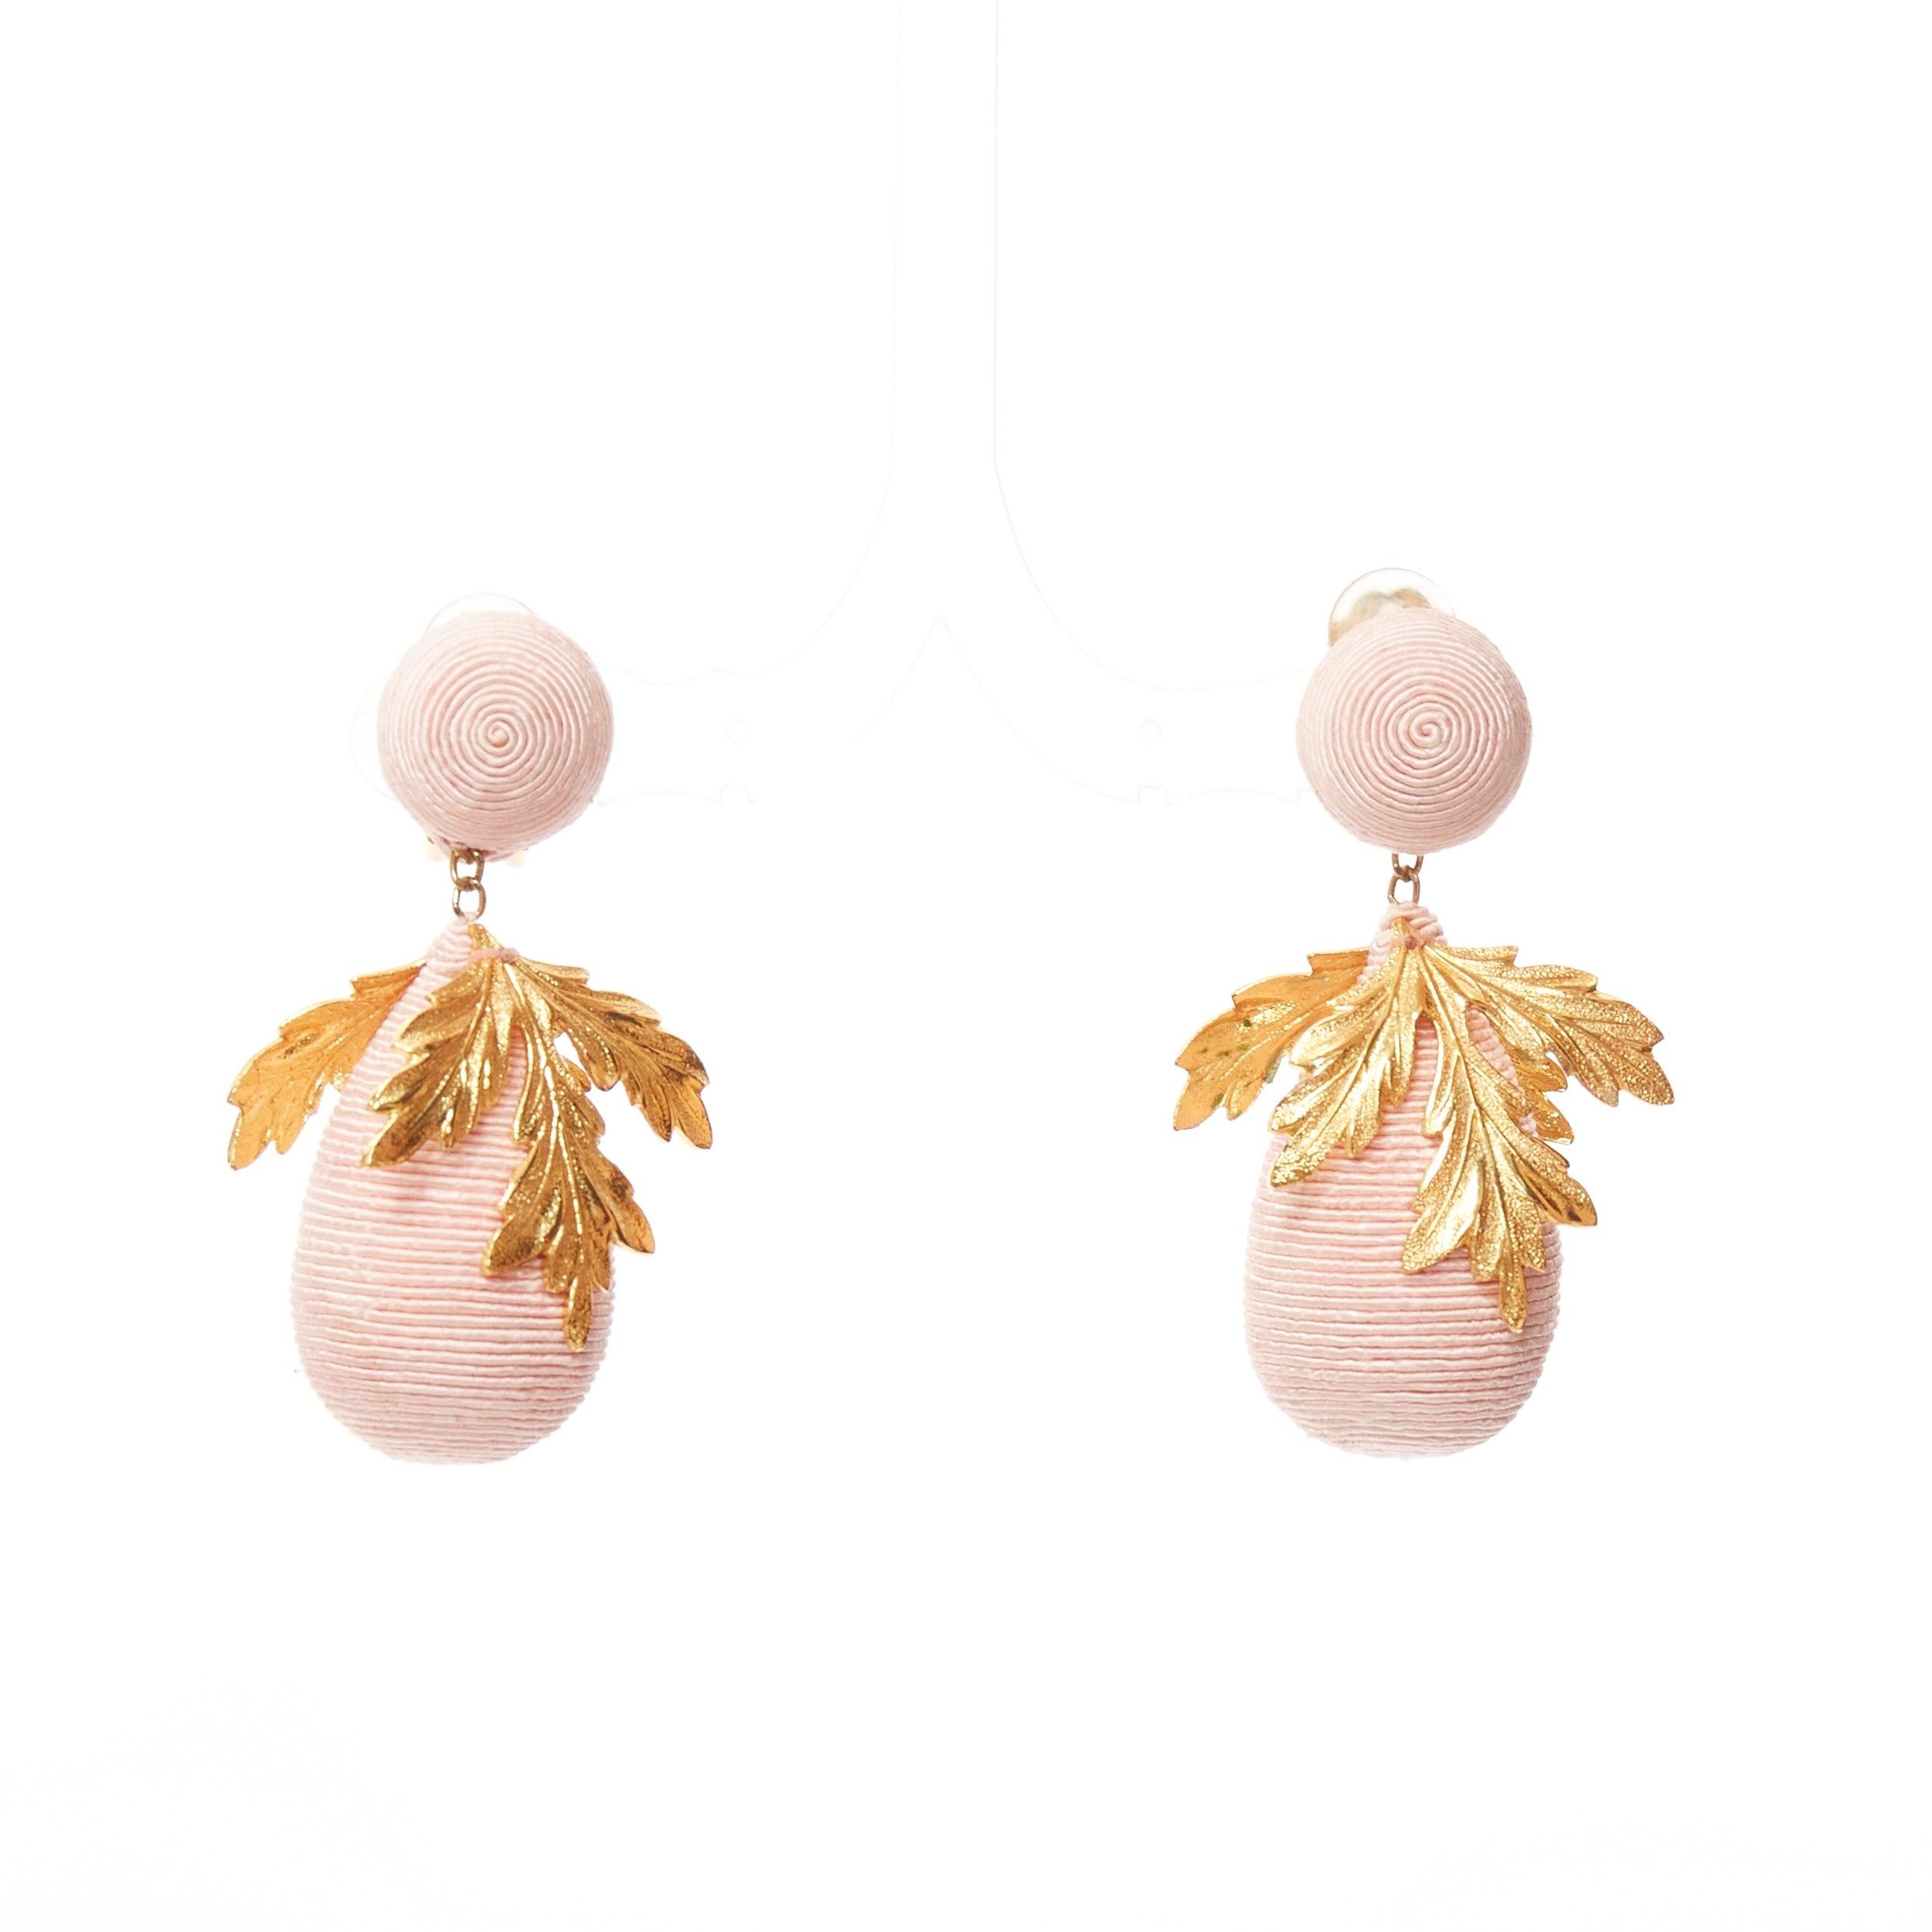 REBECCA DE RAVENEL pink applique gold metal leaf drop clip on earrings
Reference: AAWC/A01241
Brand: Rebecca De Ravenel
Material: Metal, Fabric
Color: Gold, Pink
Pattern: Solid
Closure: Clip On
Lining: Gold Metal

CONDITION:
Condition: Very good,